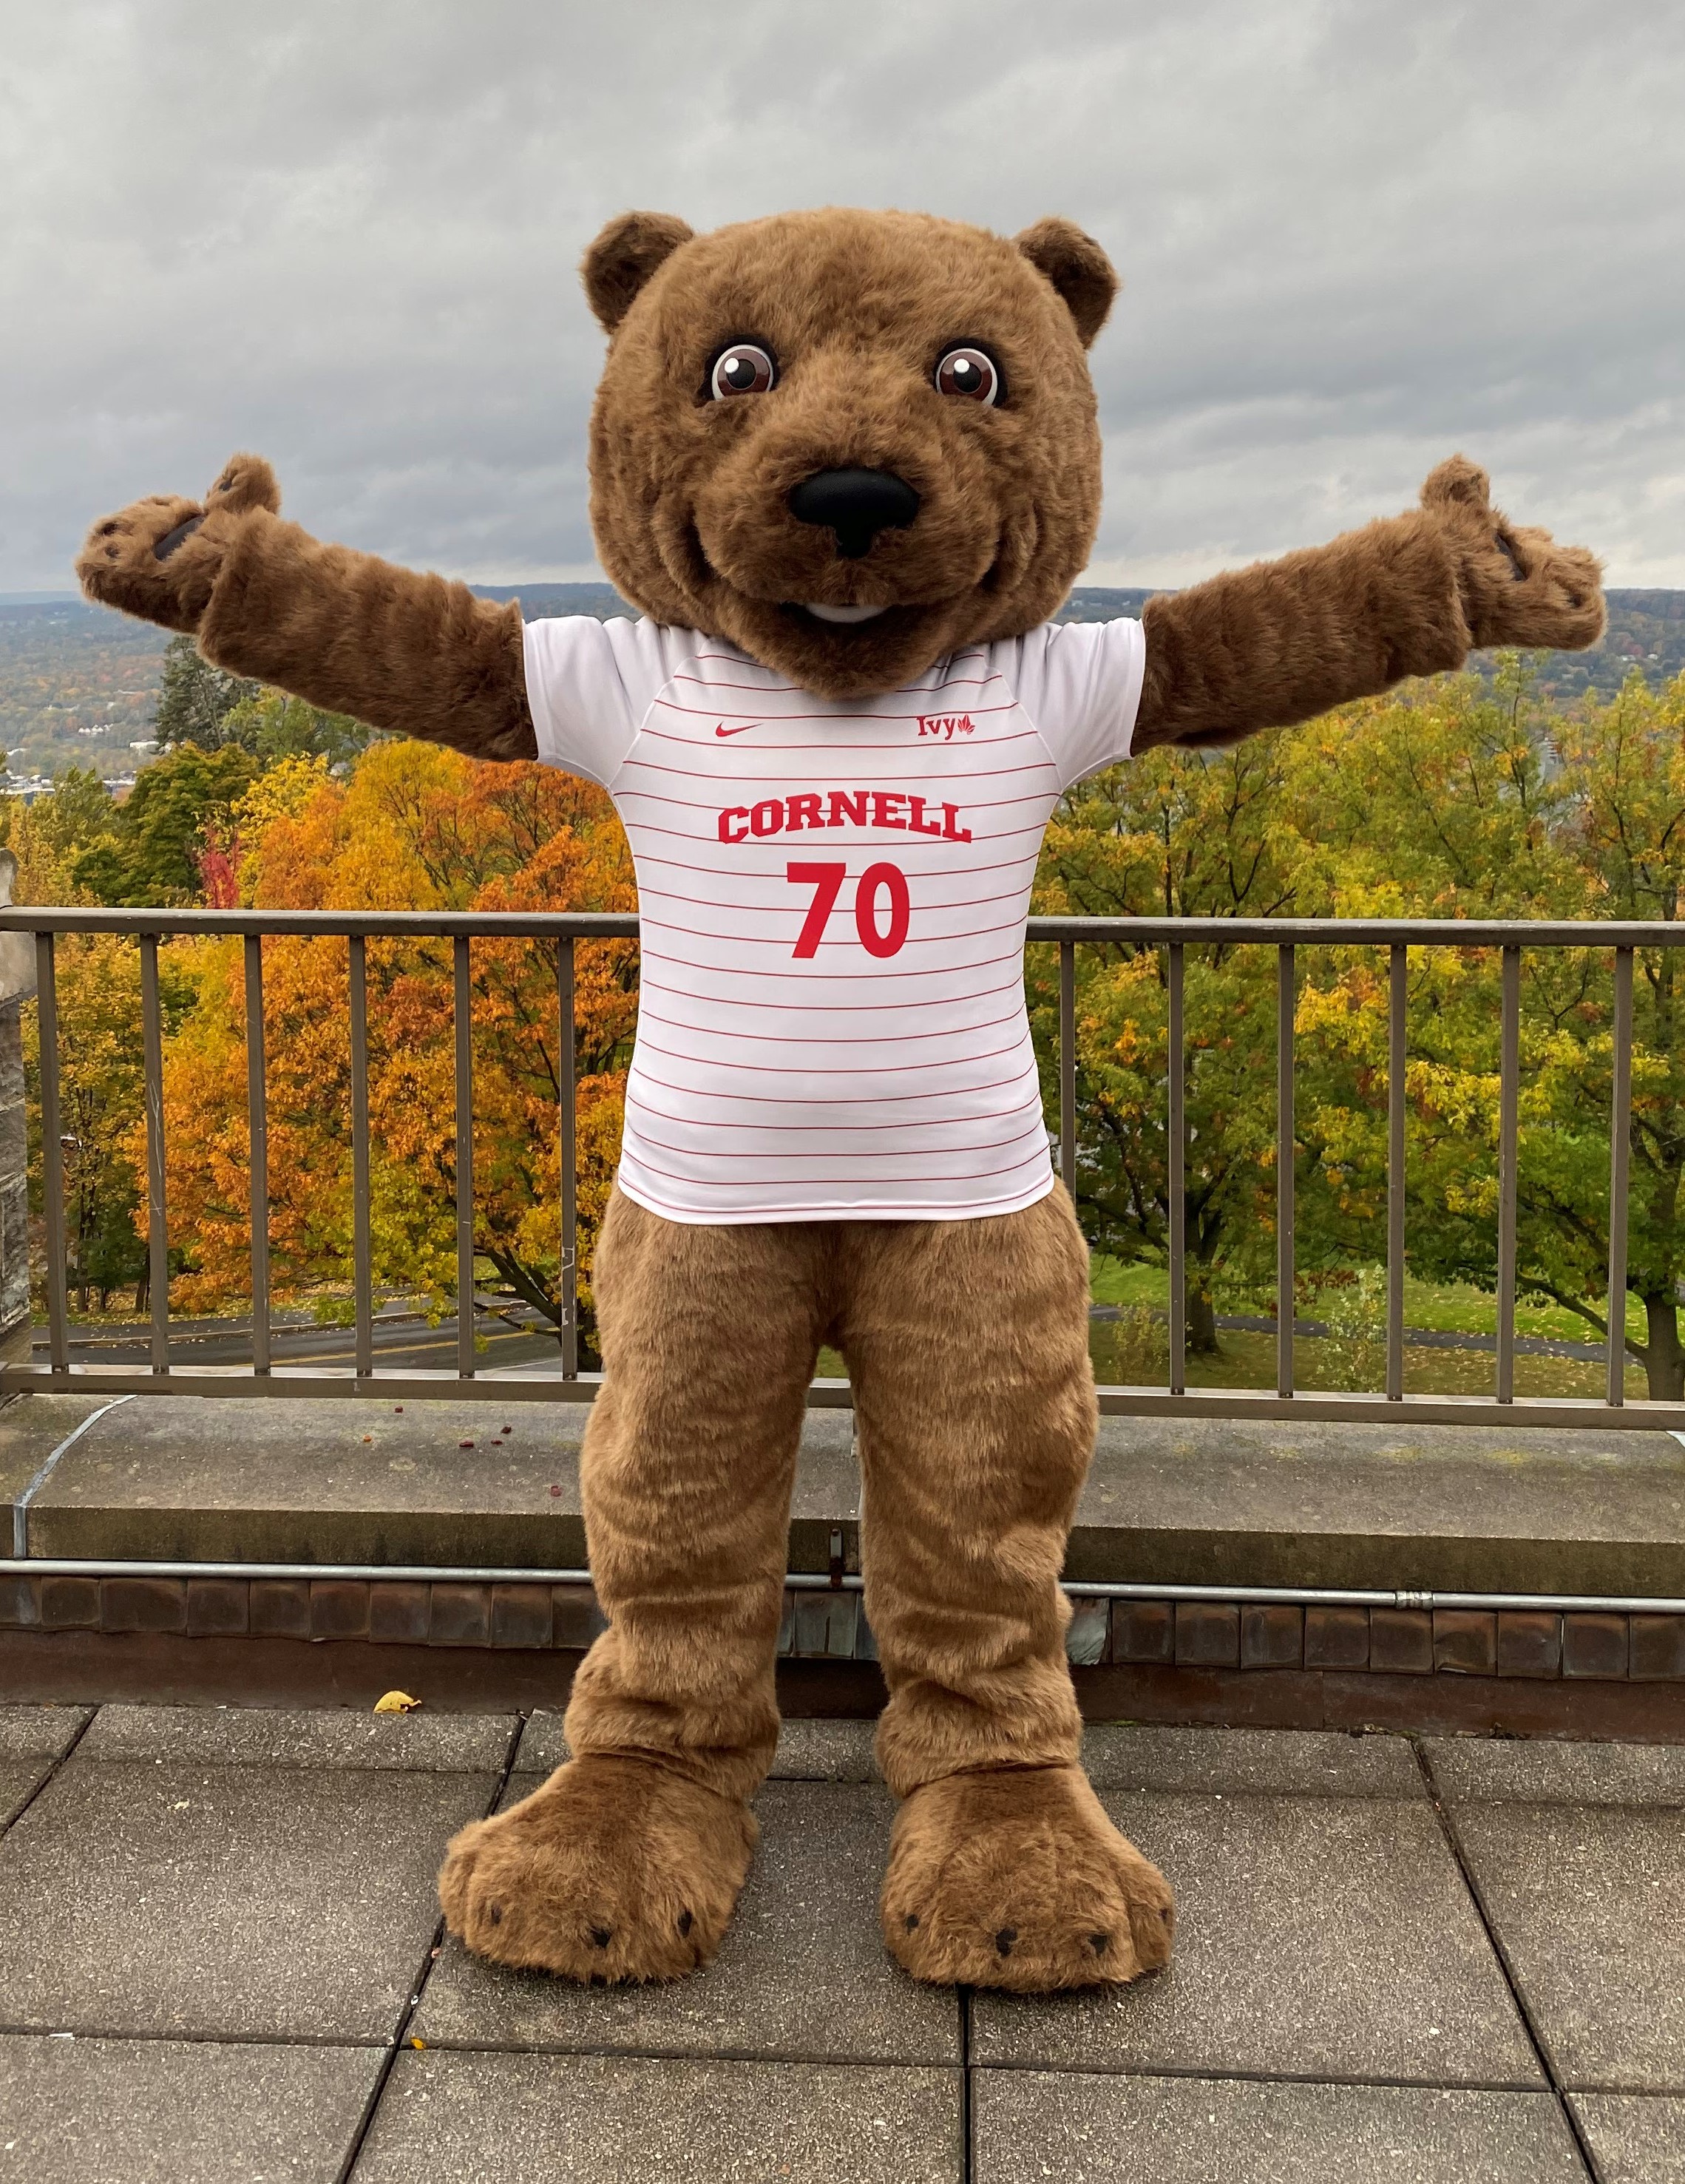 Photo of brown bear with Cornell shirt. Cornell's mascot Touchdown.